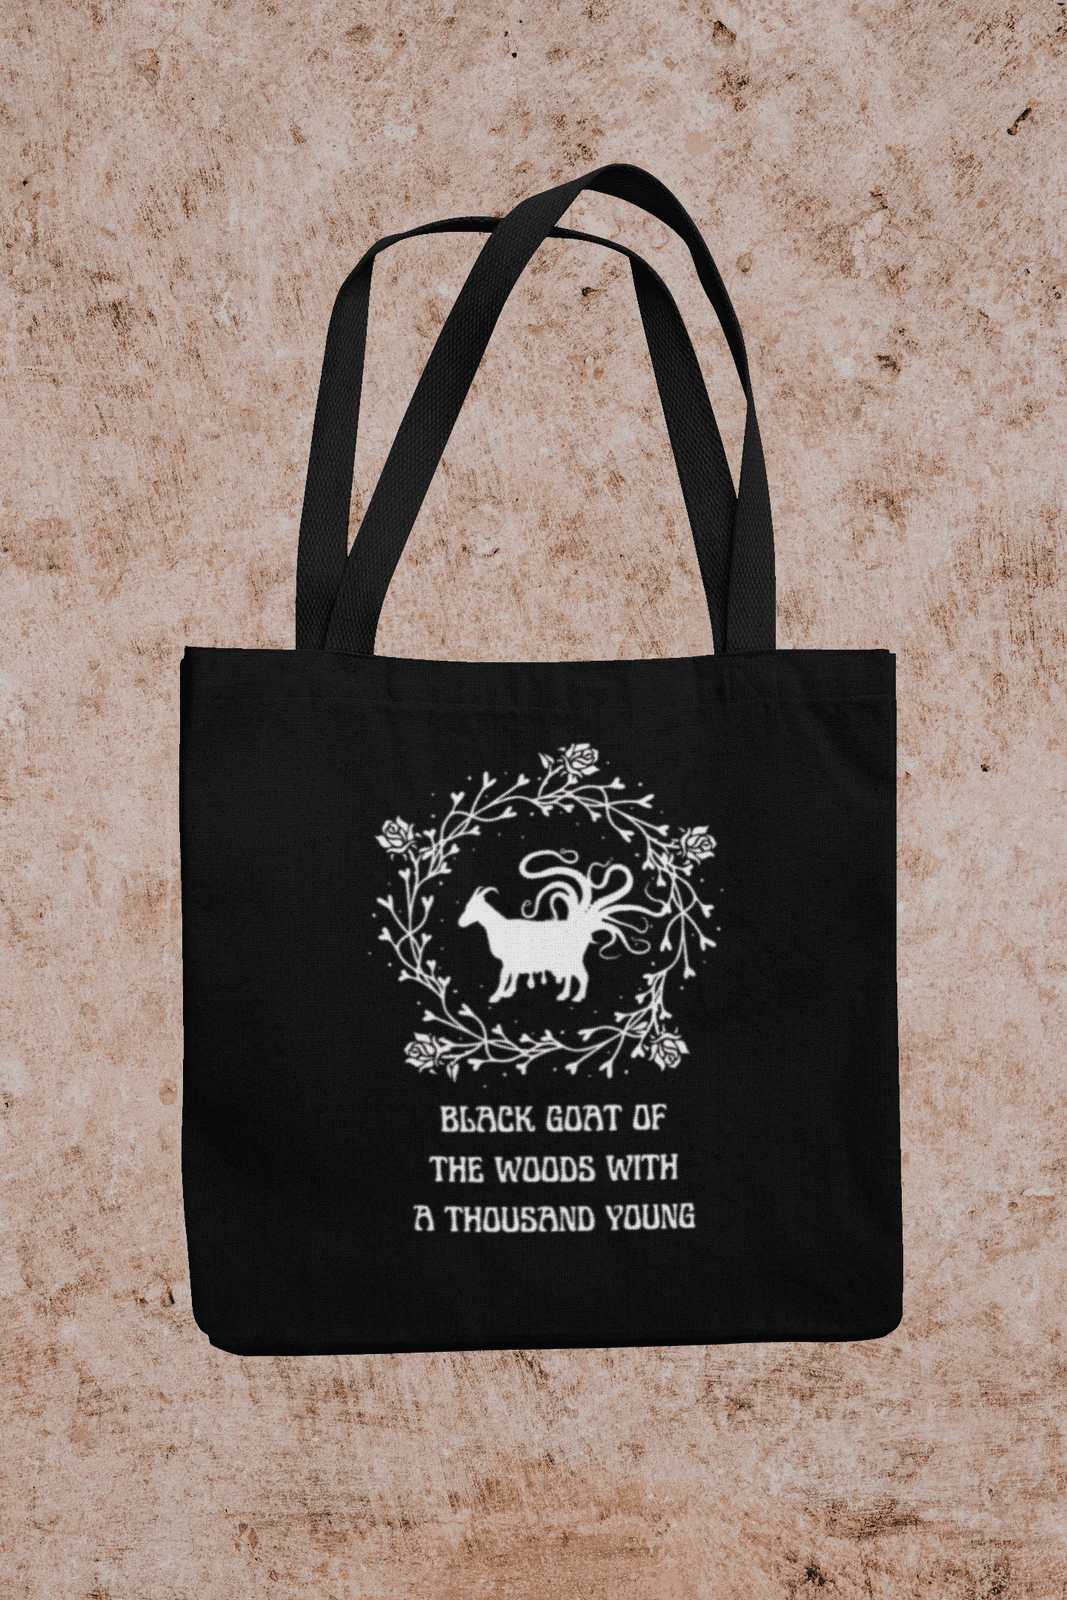 "Black Goat of The Woods with a Thousand Young" Organic Tote Bag